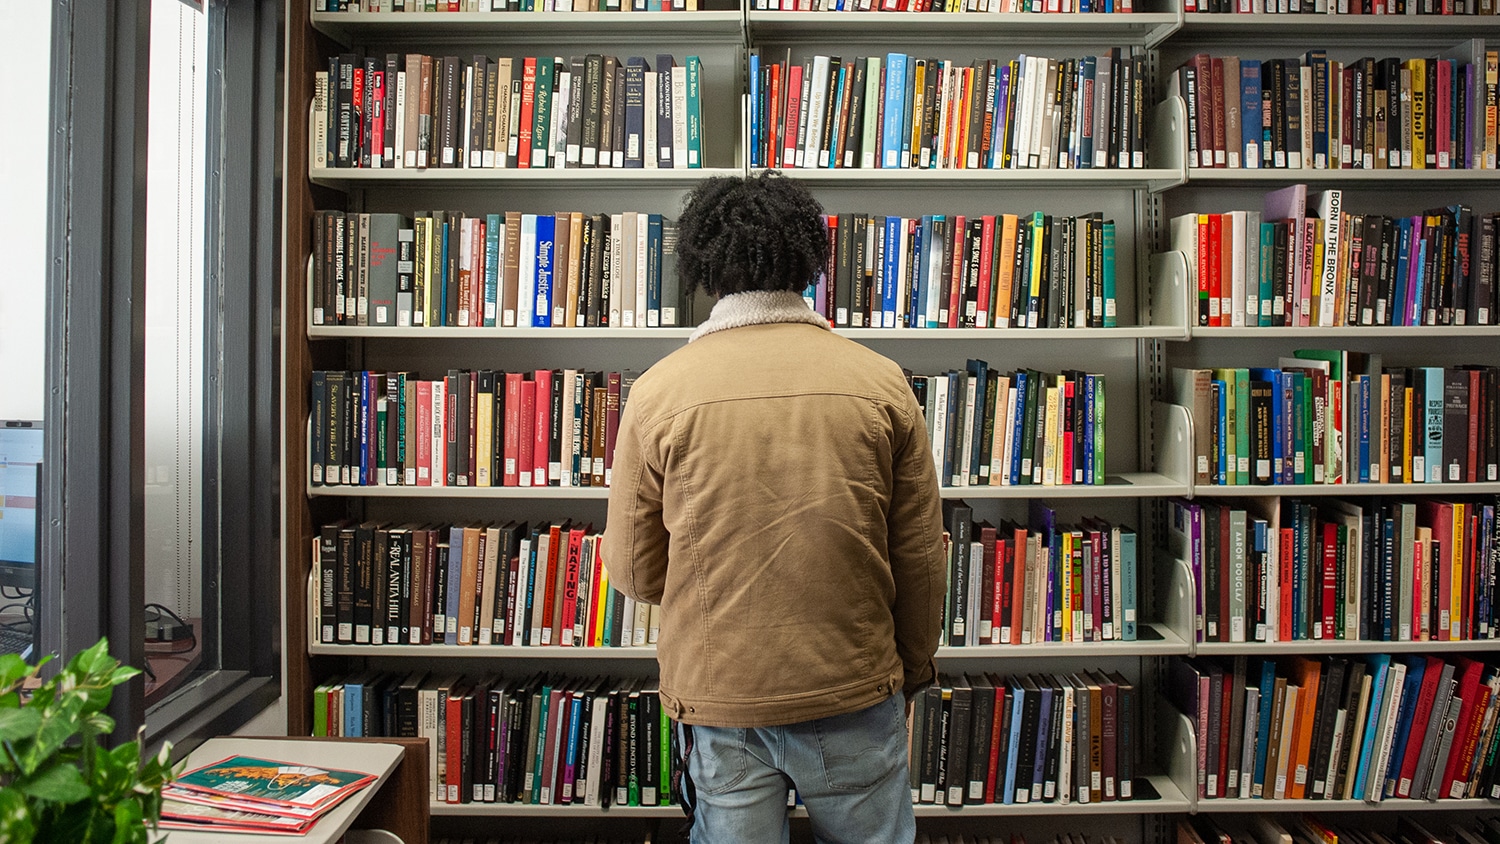 A student stands in front of a multi-tiered library book shelf. Hundreds of books, all of different sizes and colors, are on the shelf.